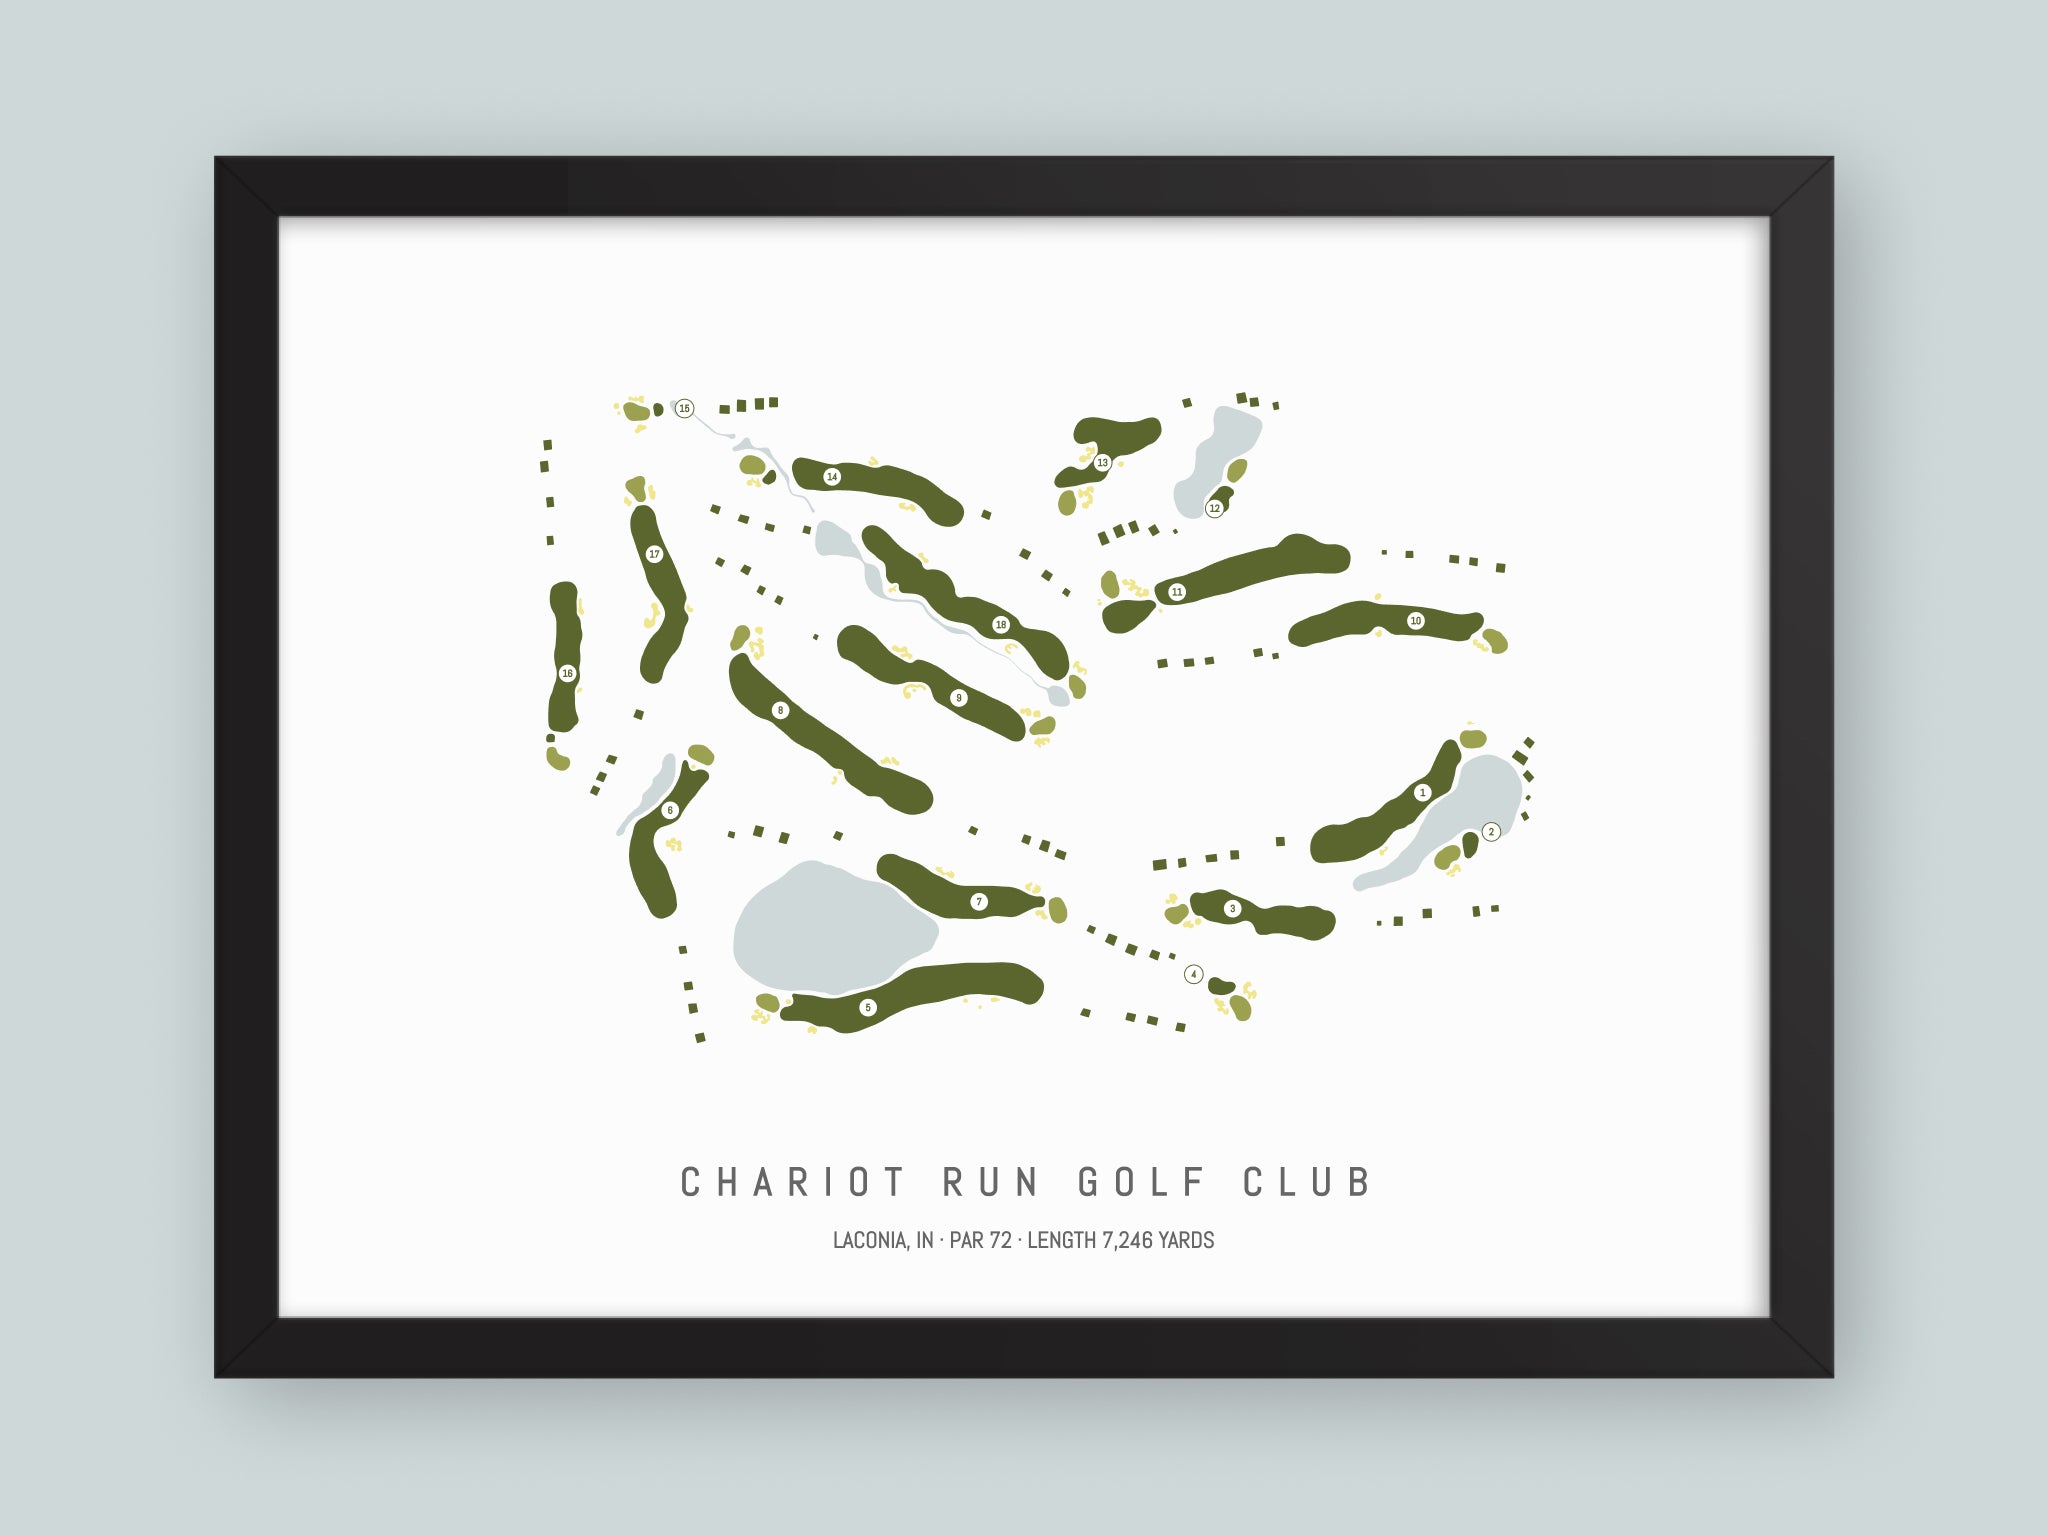 Chariot-Run-Golf-Club-IN--Black-Frame-24x18-With-Hole-Numbers